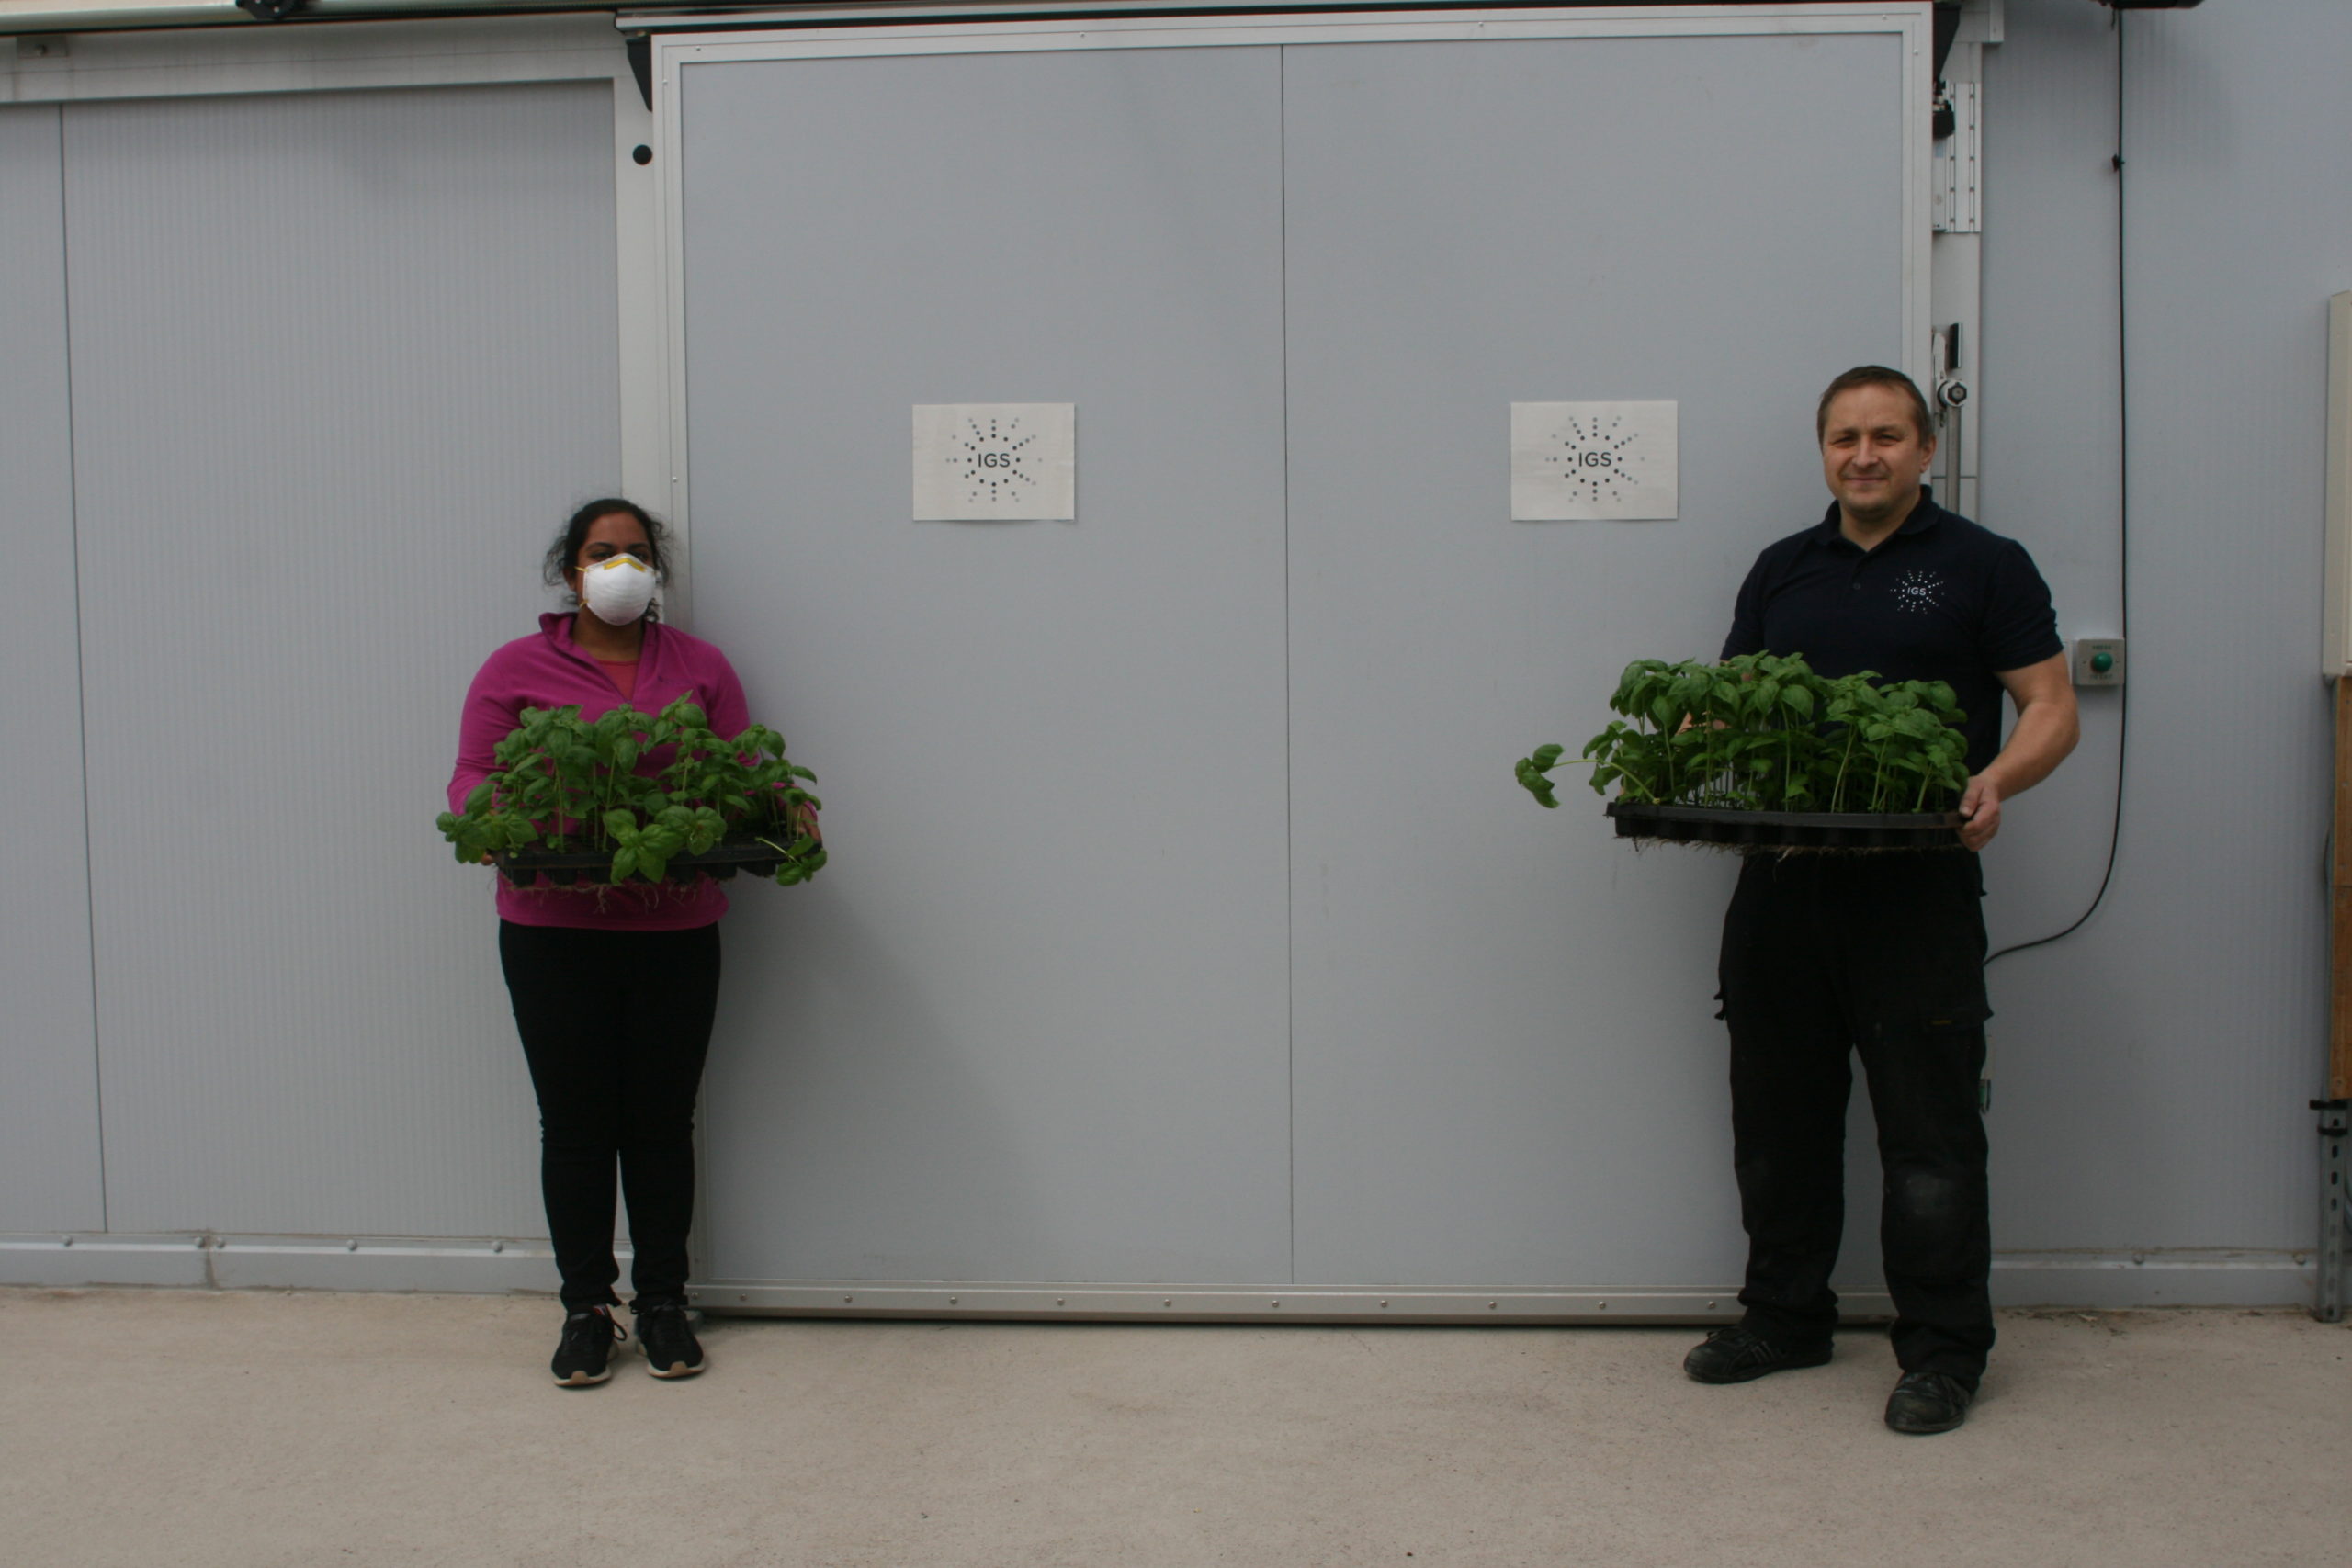 Sohini Mukhopadhyay, left, from Dudhope Multicultural Centre collecting produce from IGS technician Andris Sprukts, right, at the Invergowrie vertical farm.